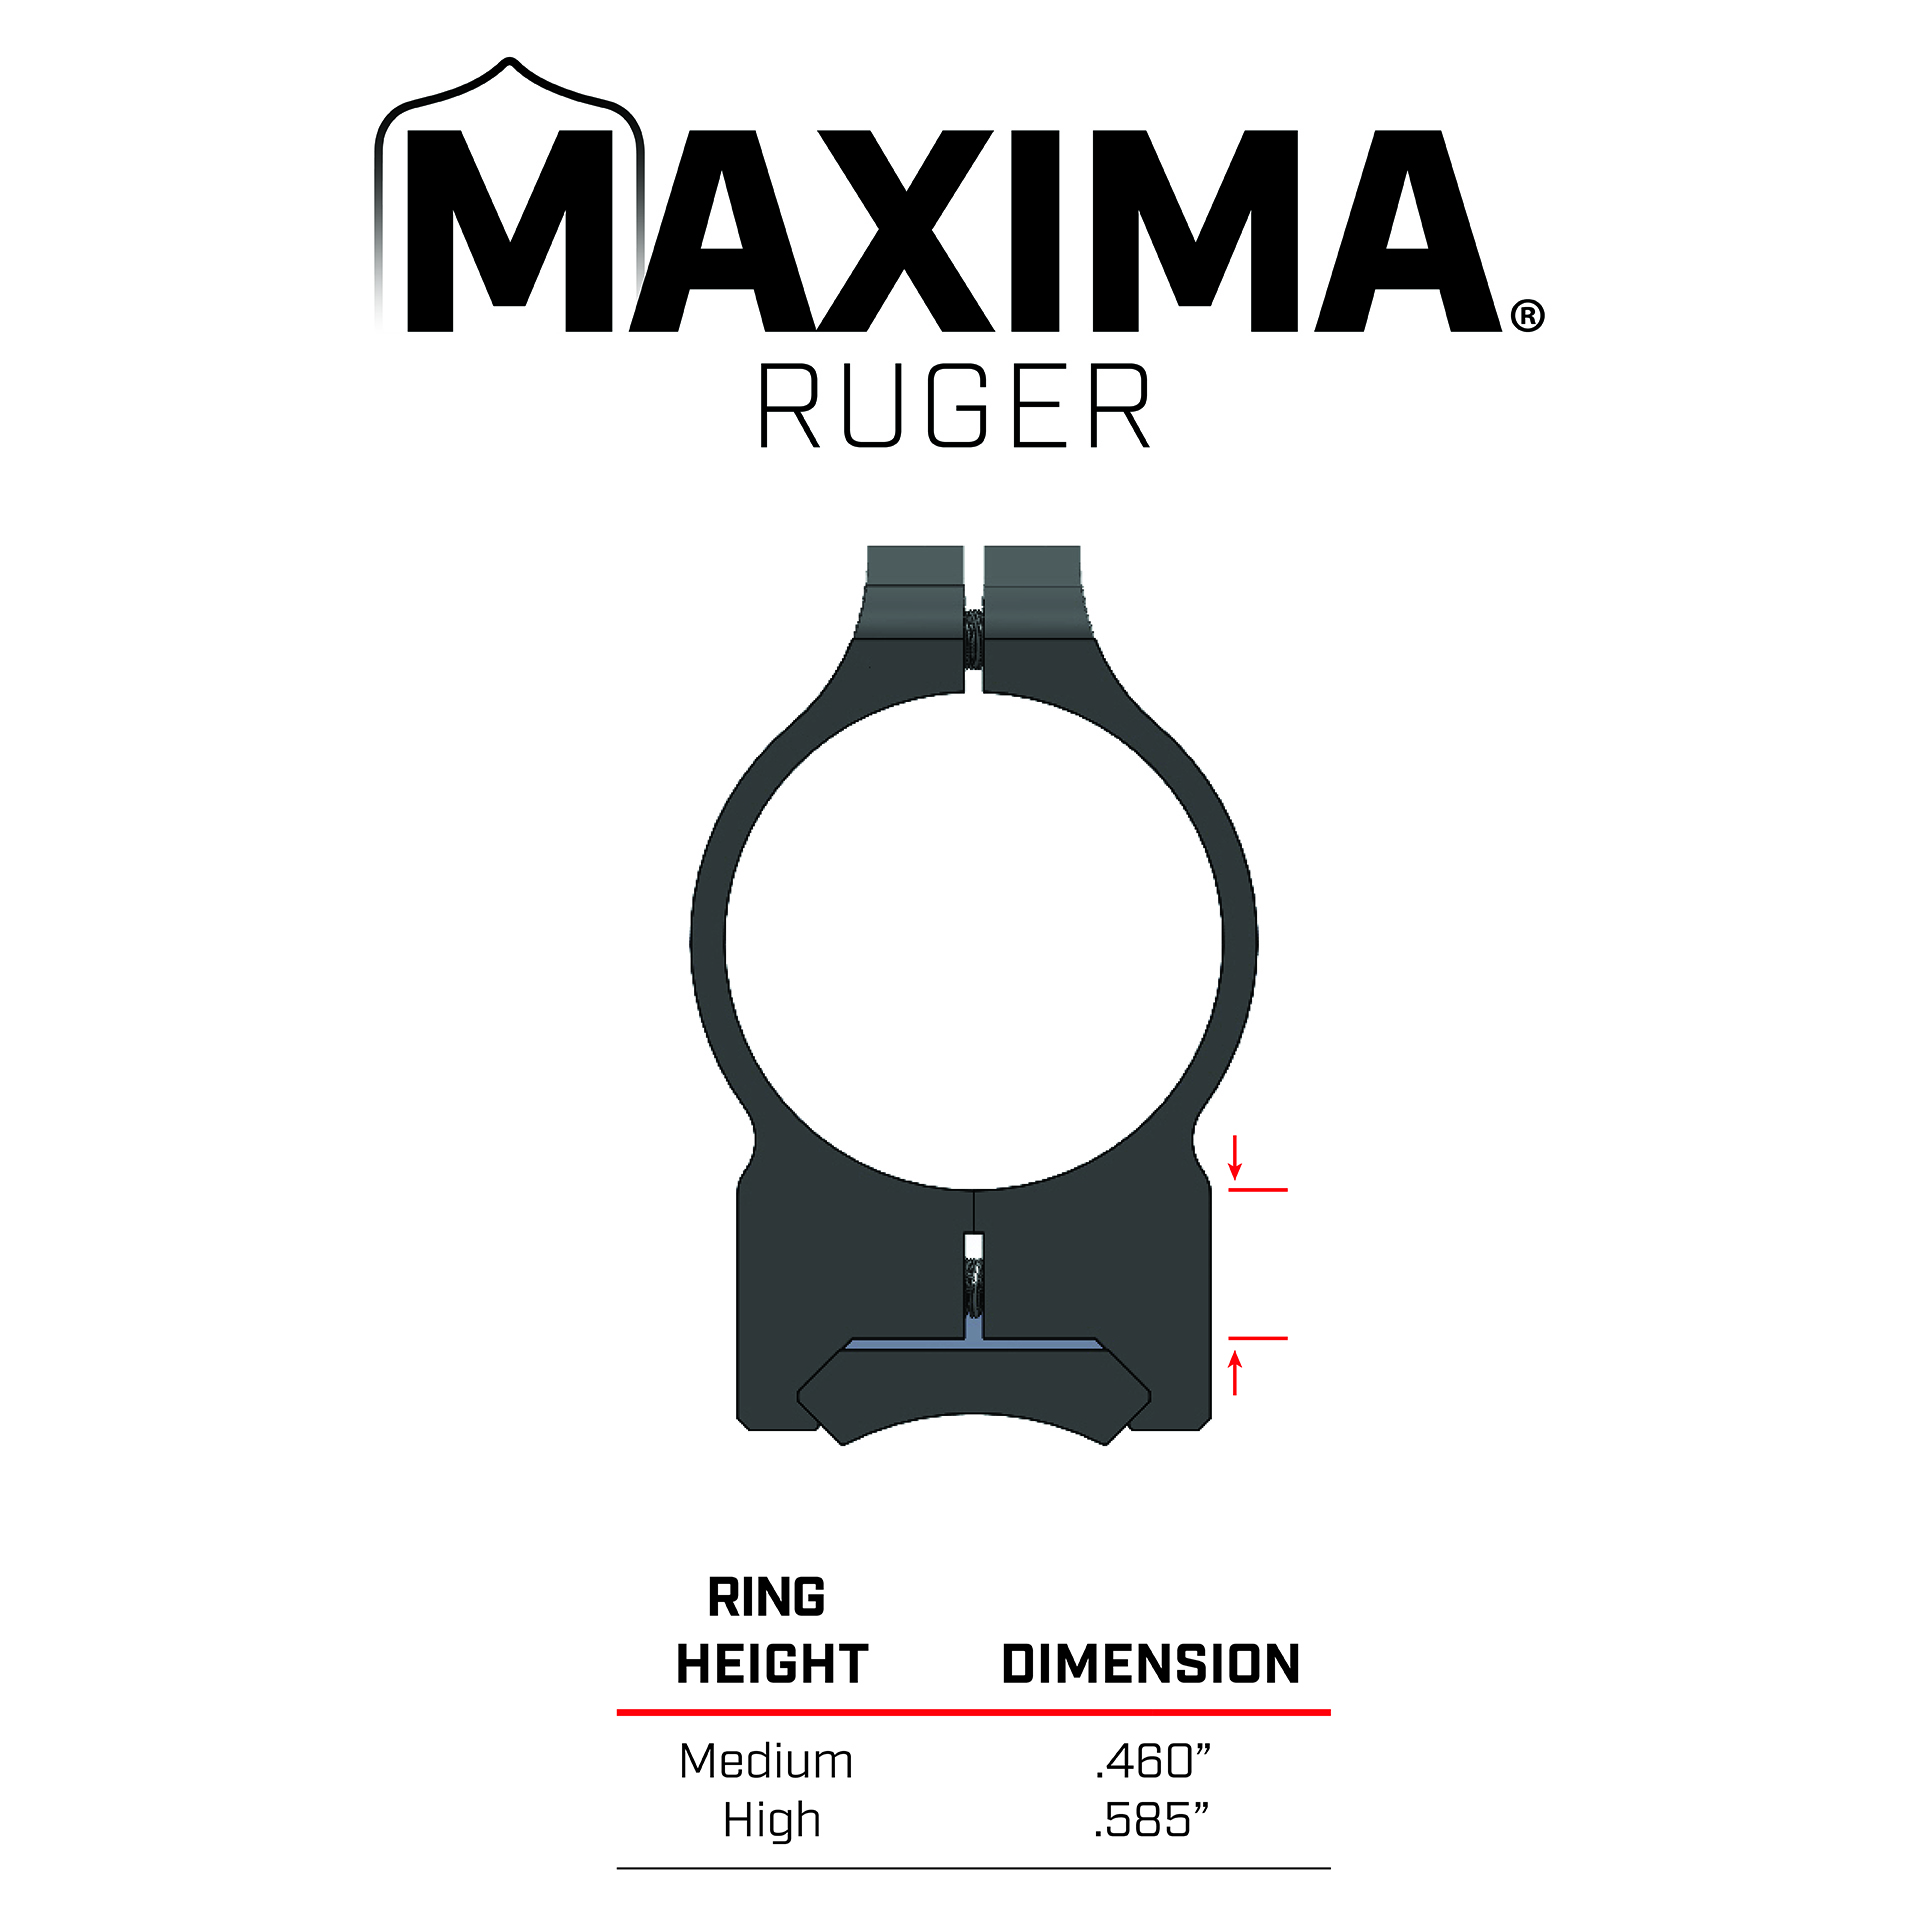 ring height for maxima scope rings for Ruger. med .460 inch, high .585 inch 